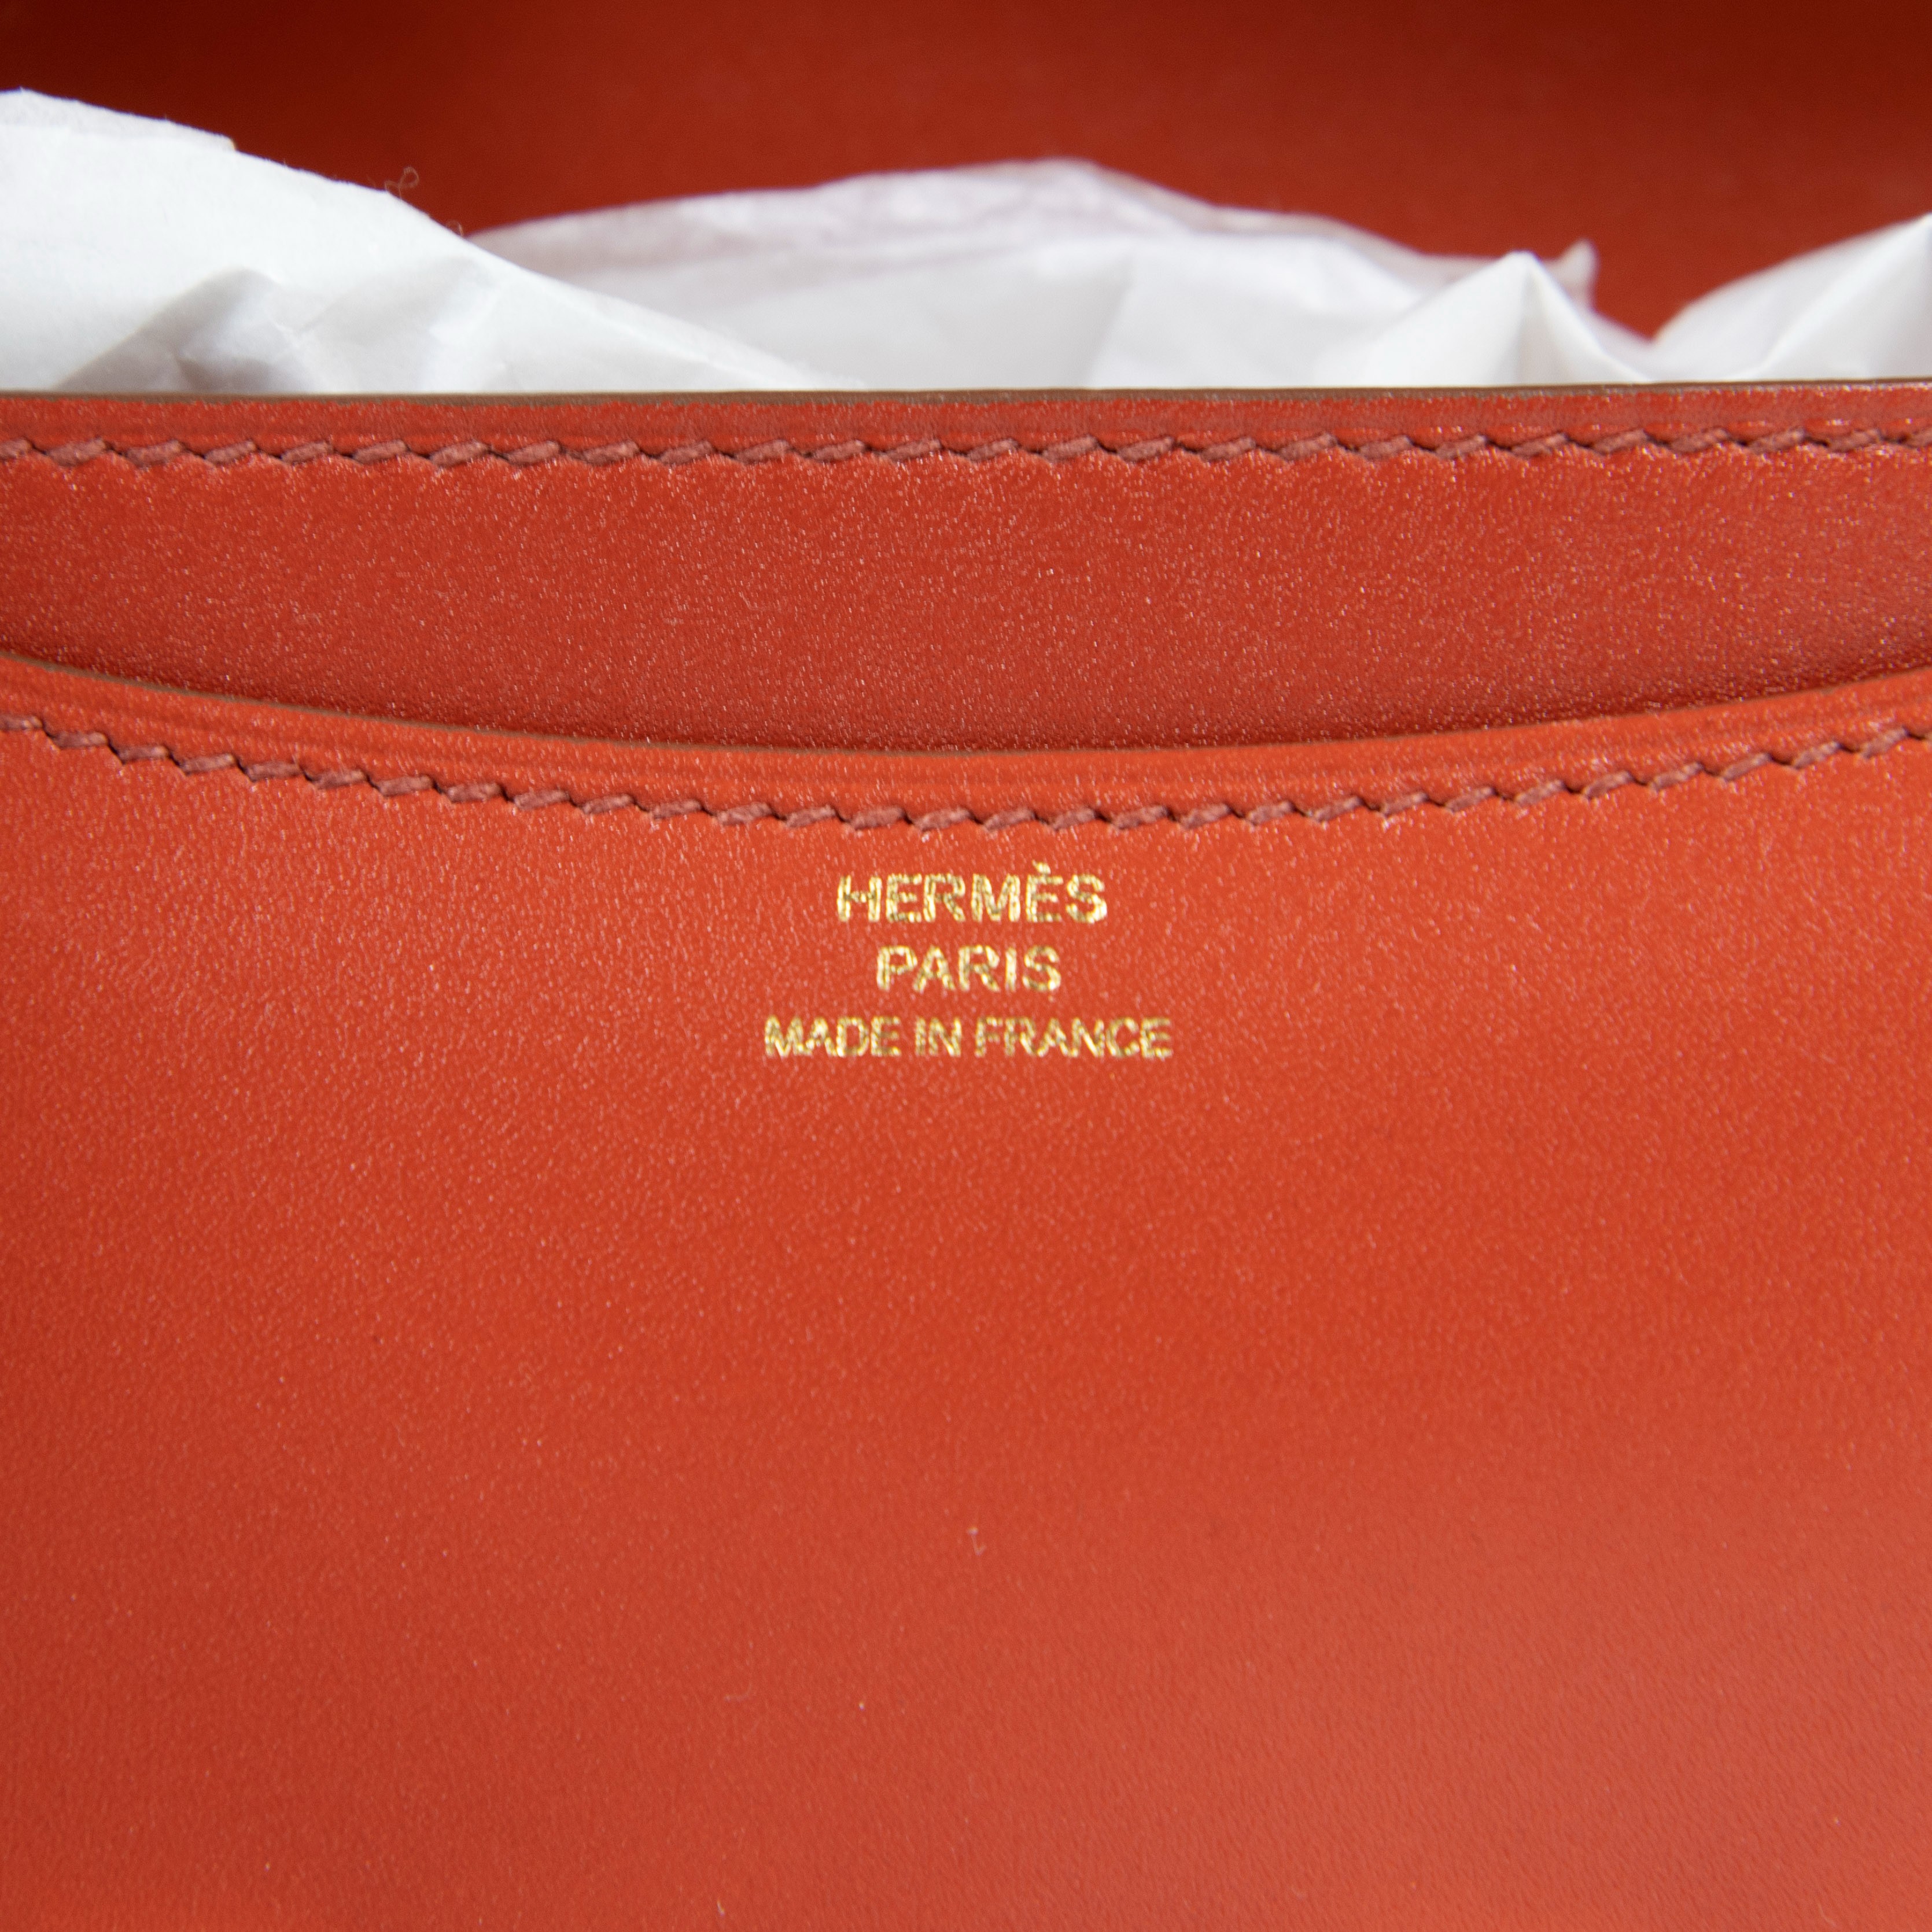 Hermes leather handback model Constance coral color with original bag and box - Image 9 of 9